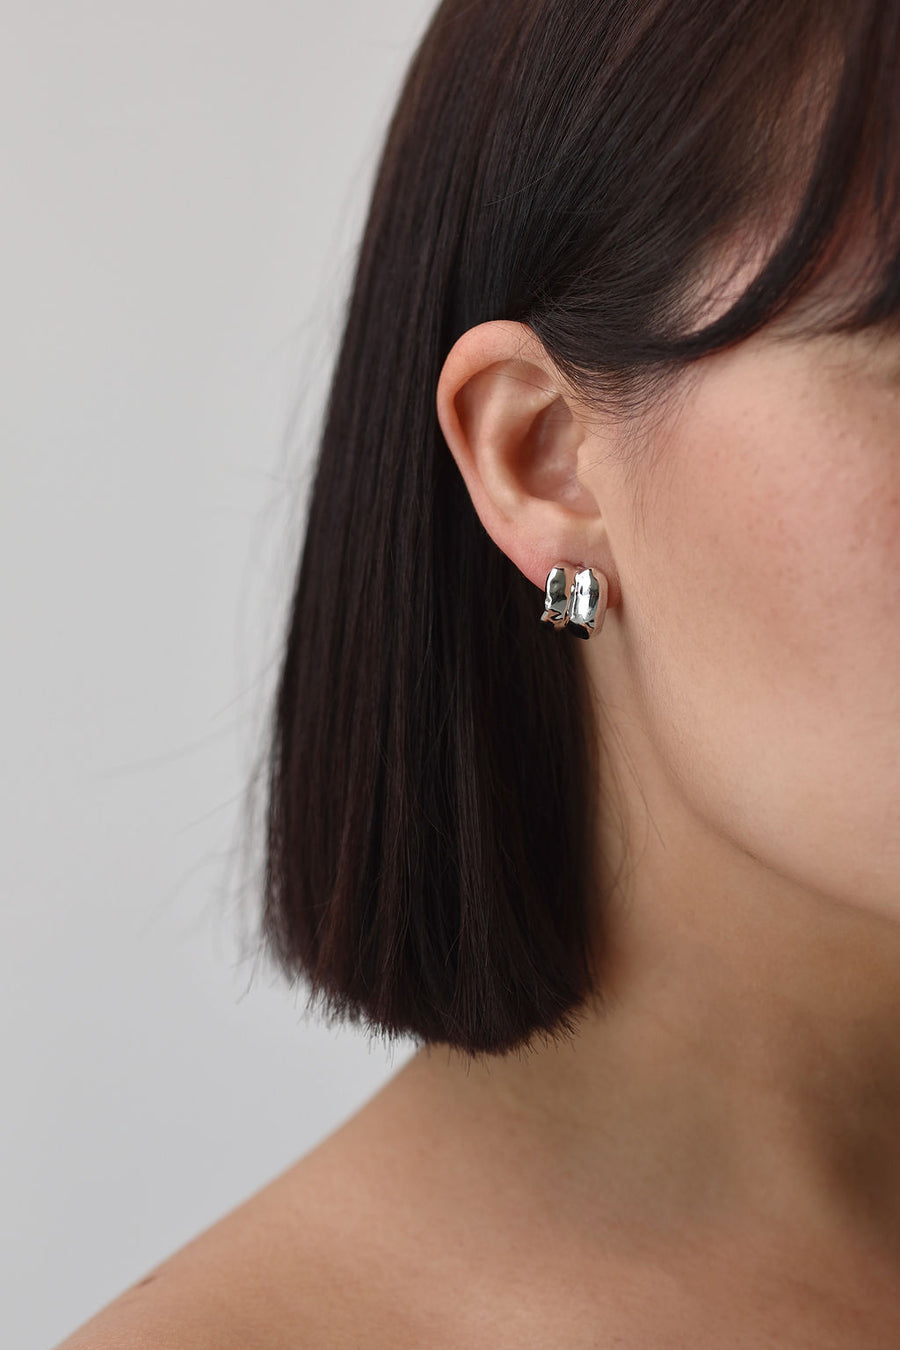 A close up of one side of a woman's face wearing a small chunky silver earring